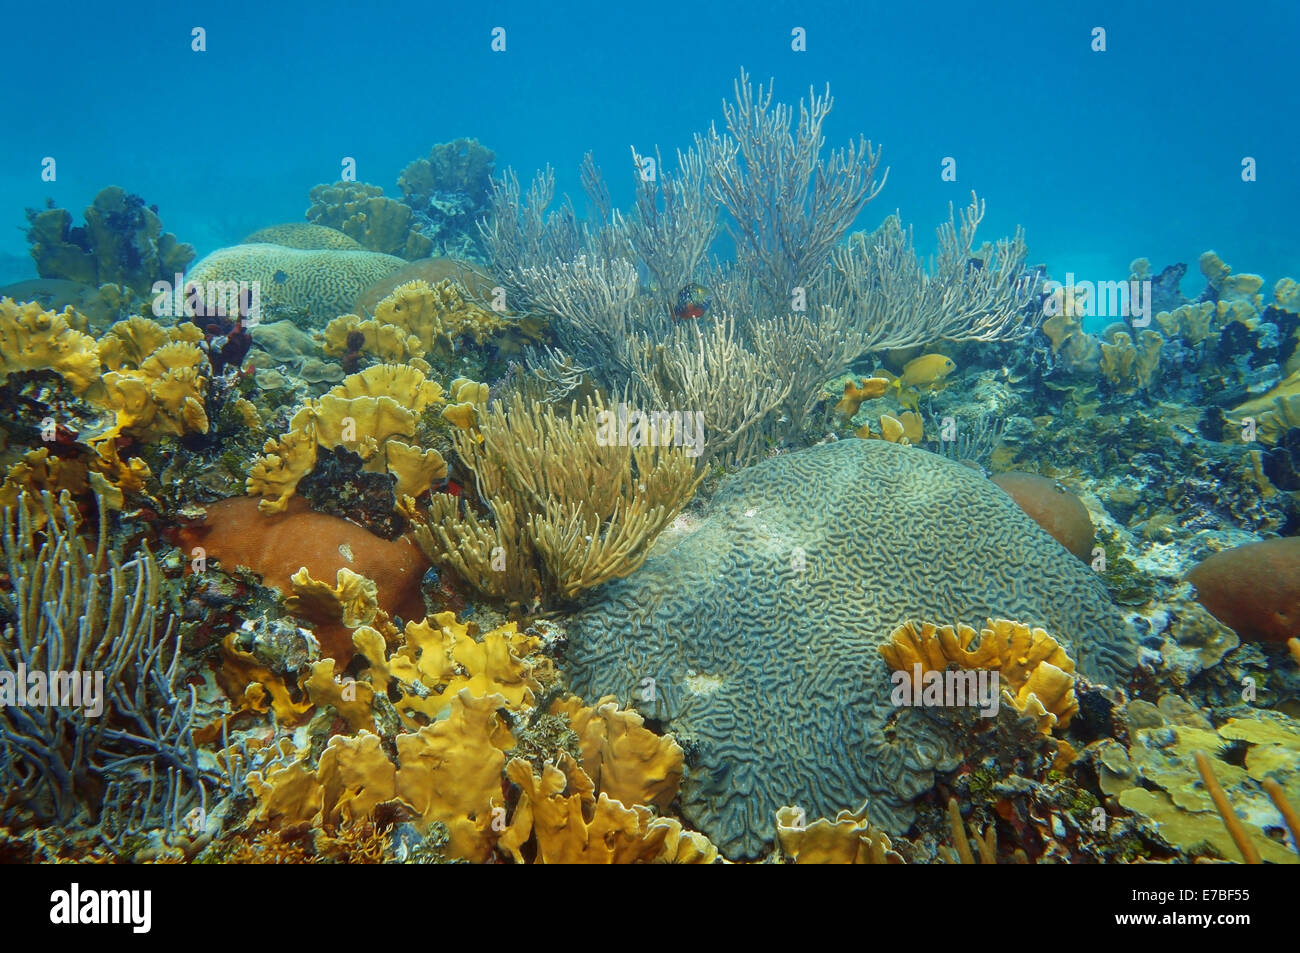 underwater landscape in an healthy coral reef of the Caribbean sea Stock Photo